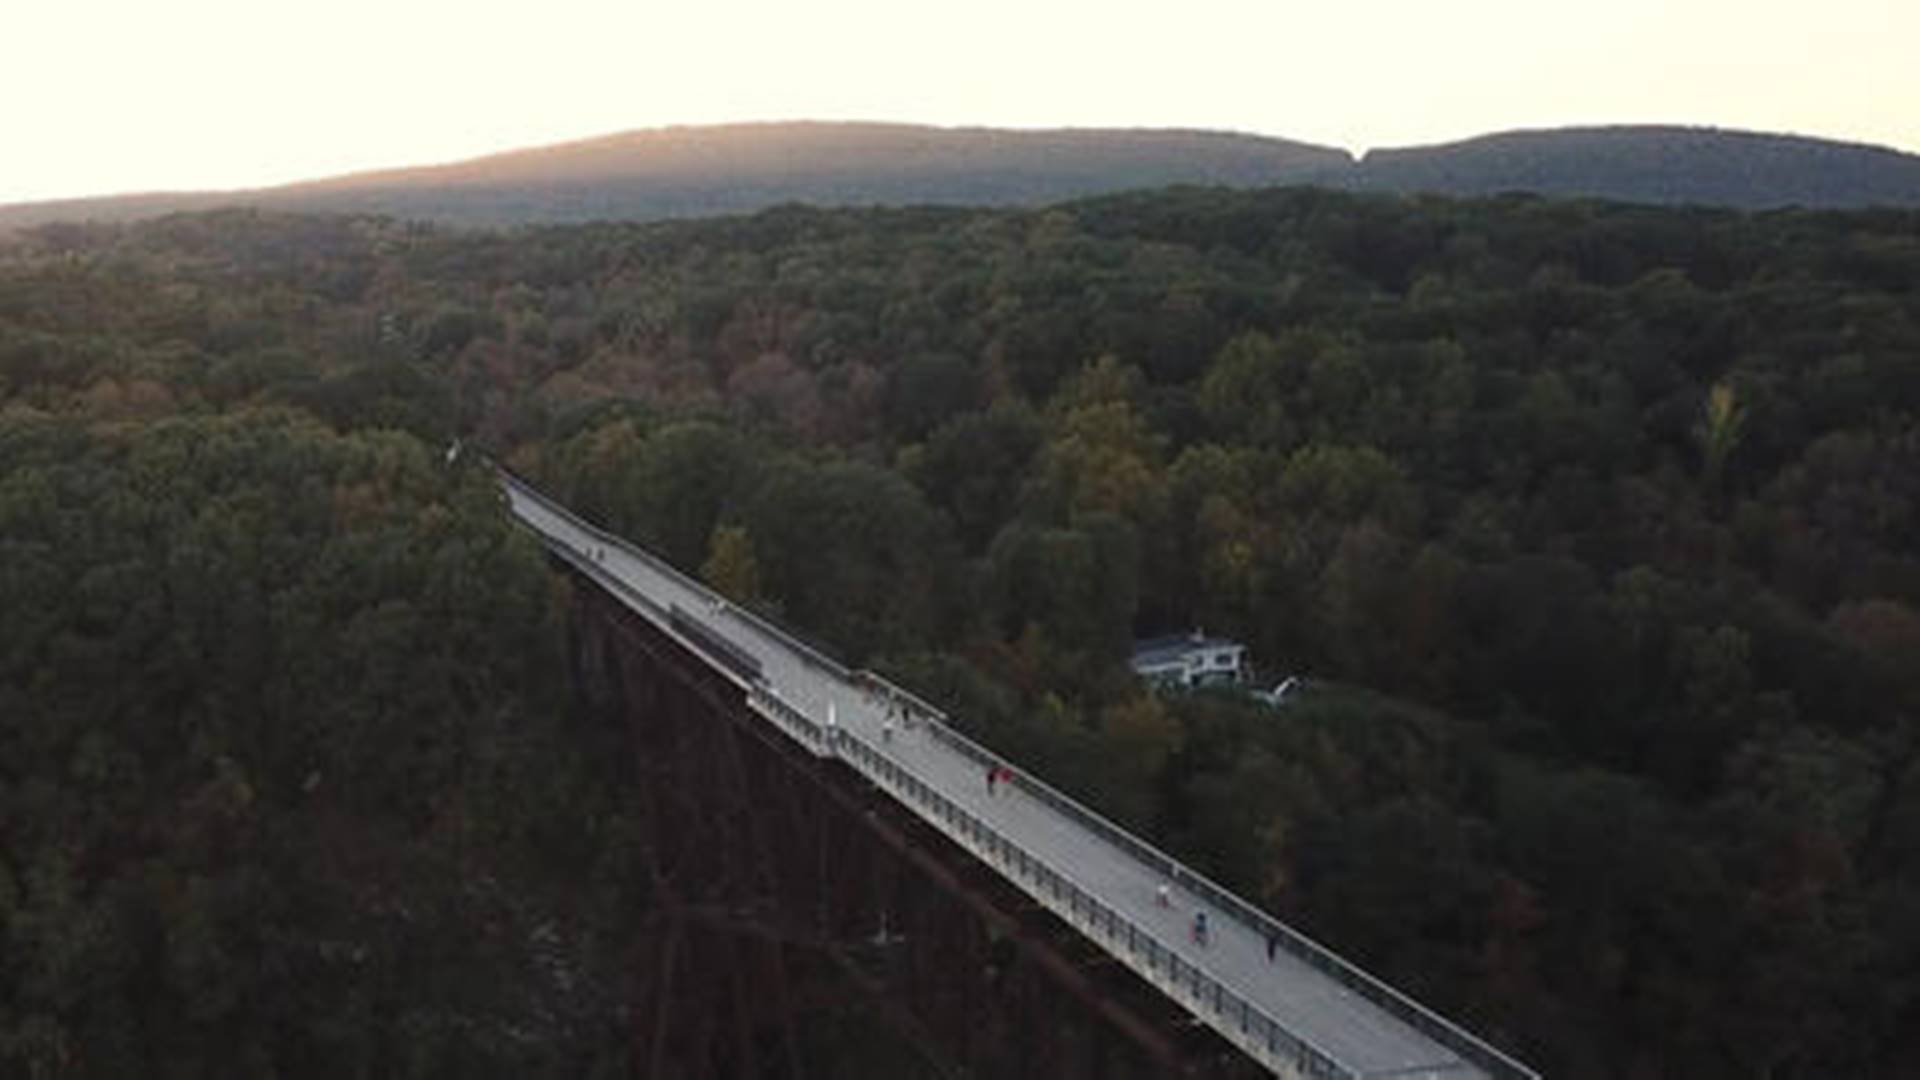 There’s a New 750-Mile Bicycle Route in New York. Take a Look - PICS and VIDEOS!